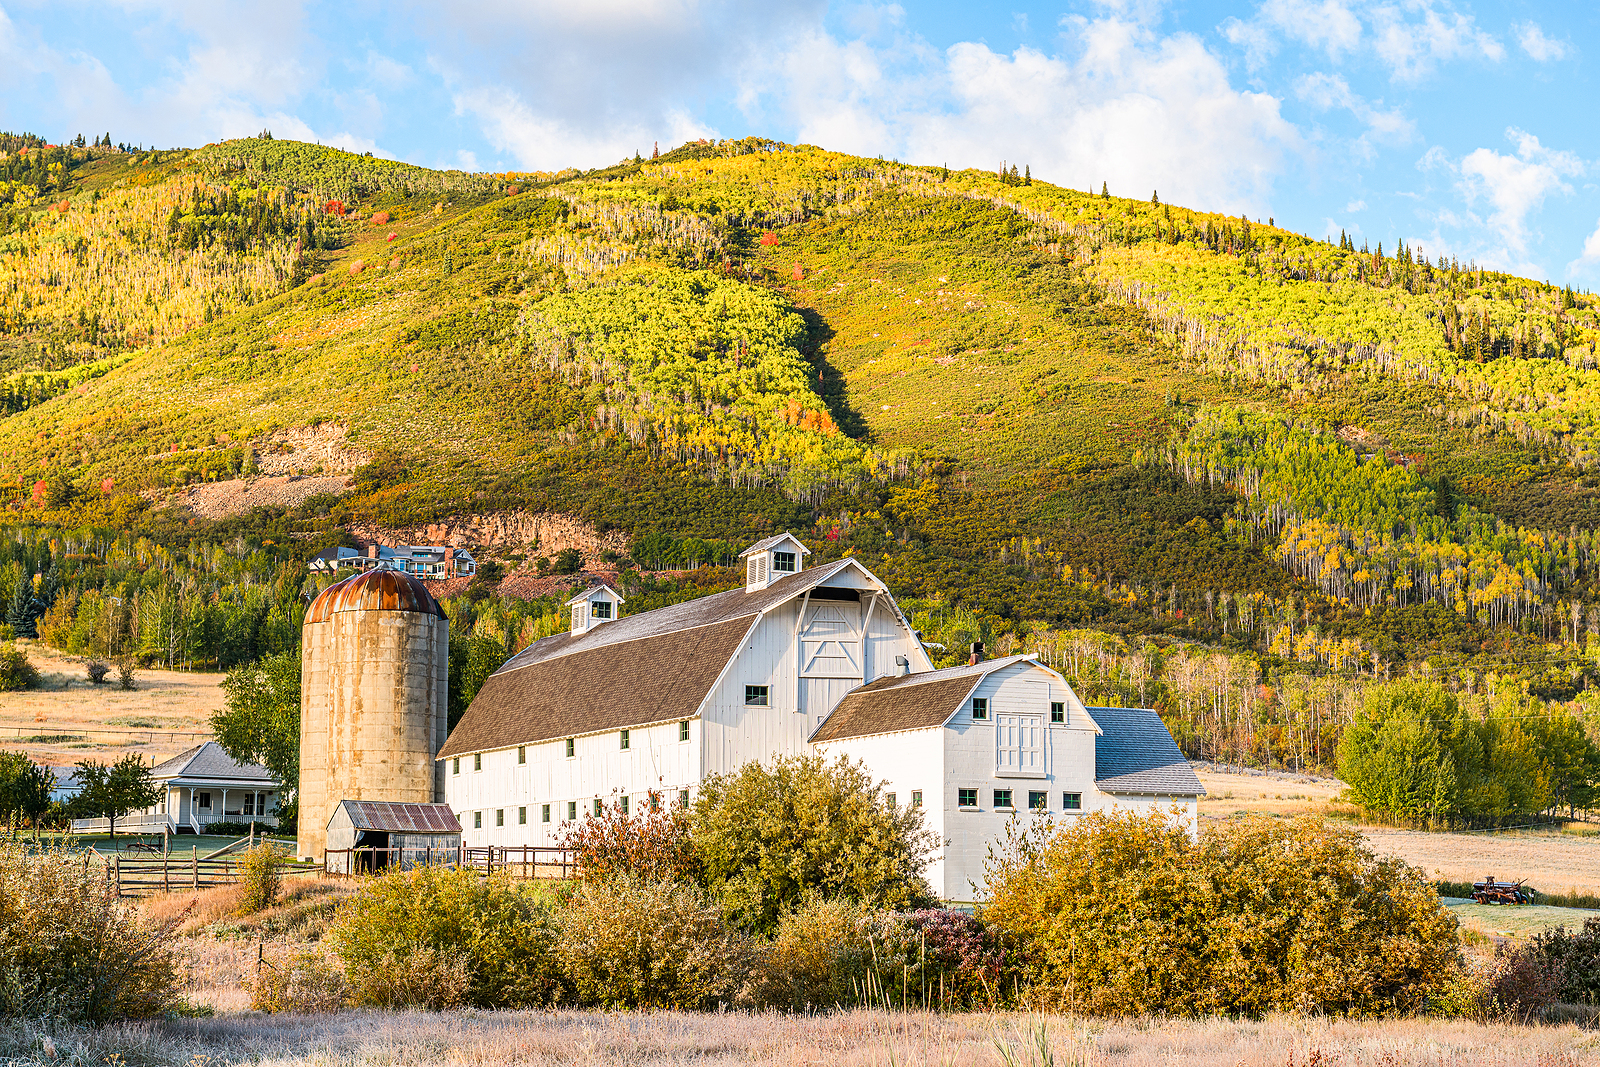 Warm-weather activities in Park City don’t get the attention they deserve. That’s why the Germania Construction team is shining a light on some of our favorite Park City trails and coffee shops that are perfect for your summer adventures.